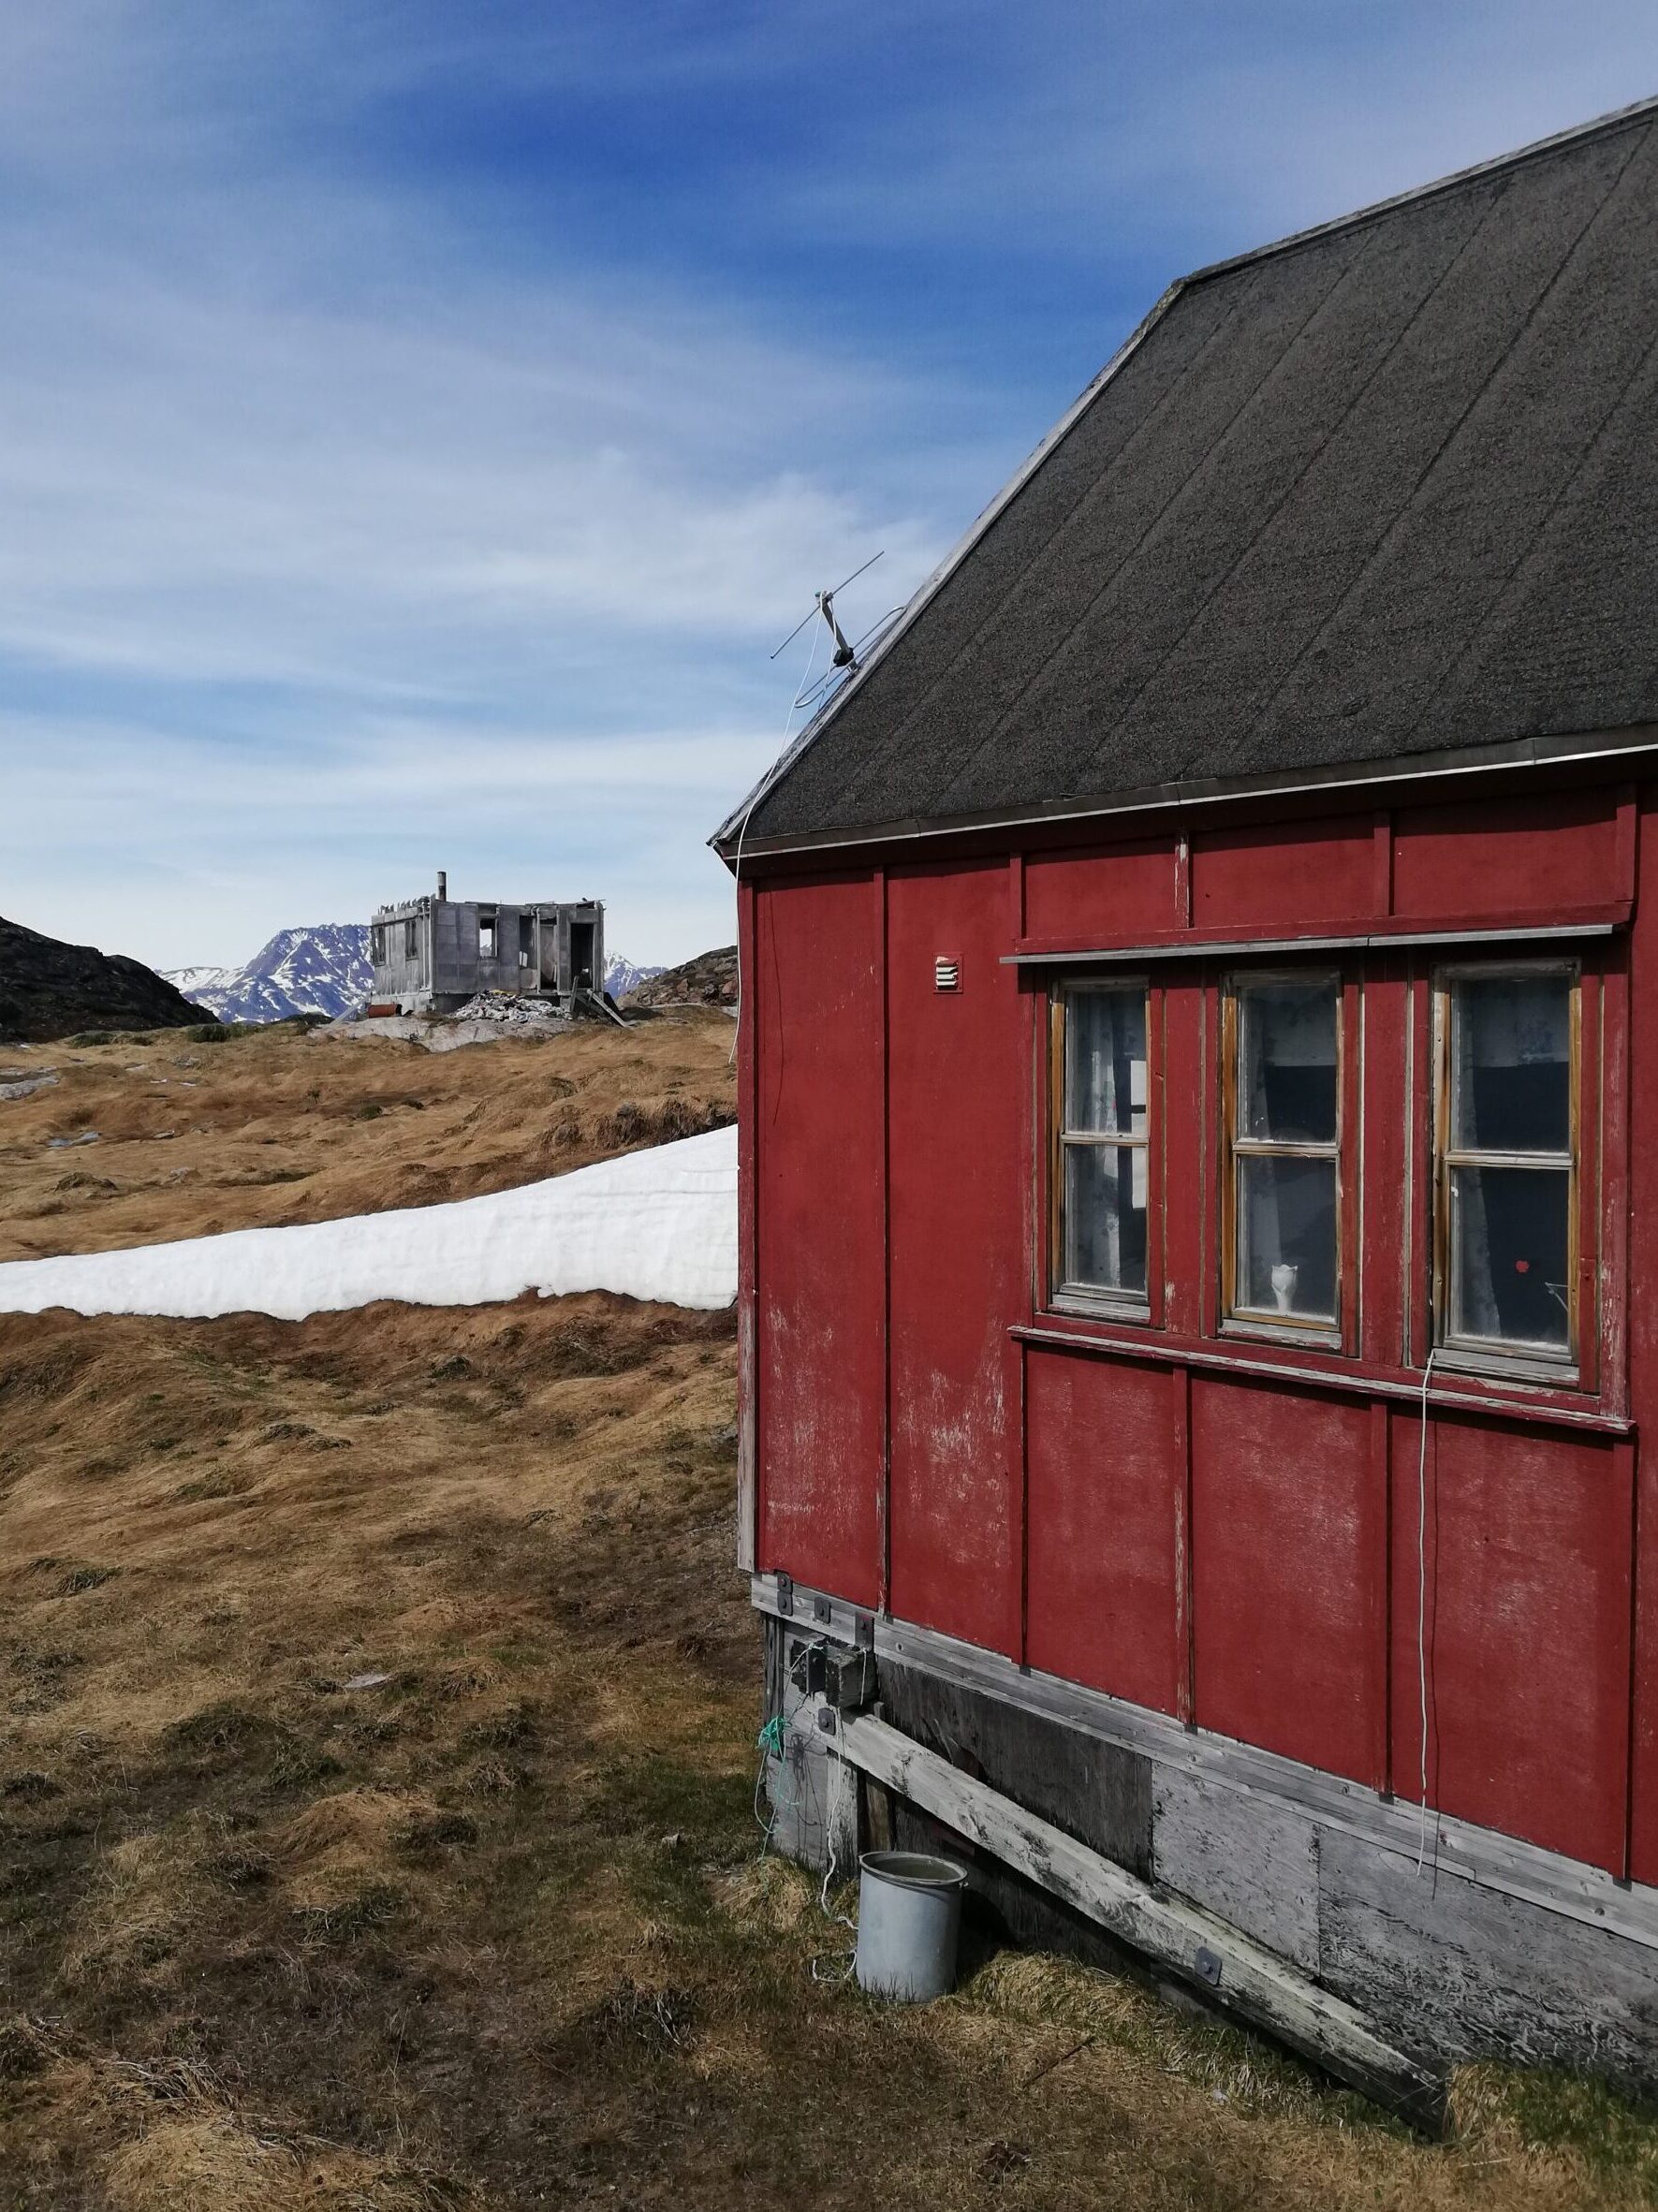 One of the most intact houses in Ikateq. Photo by Anna Burdenski - Visit East Greenland